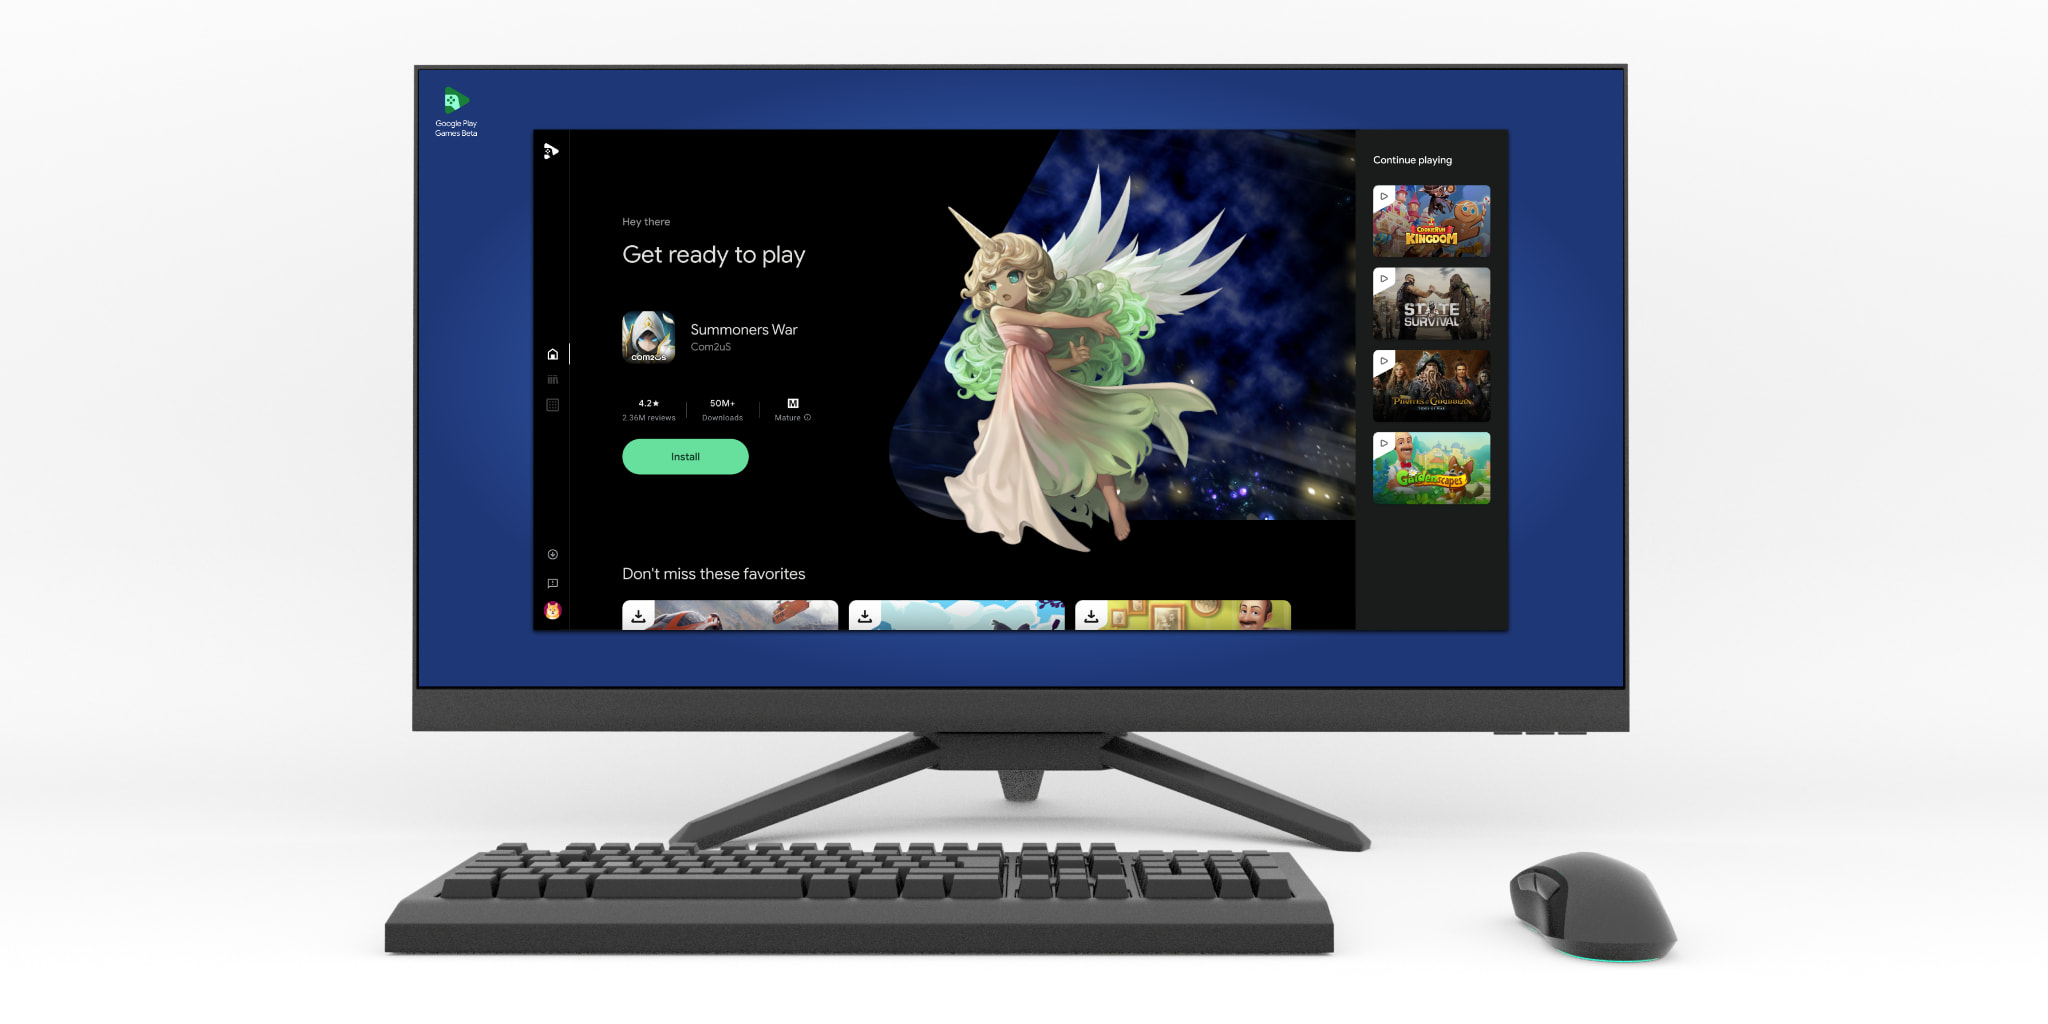 Google Play Games beta now on Windows desktops, if that's your